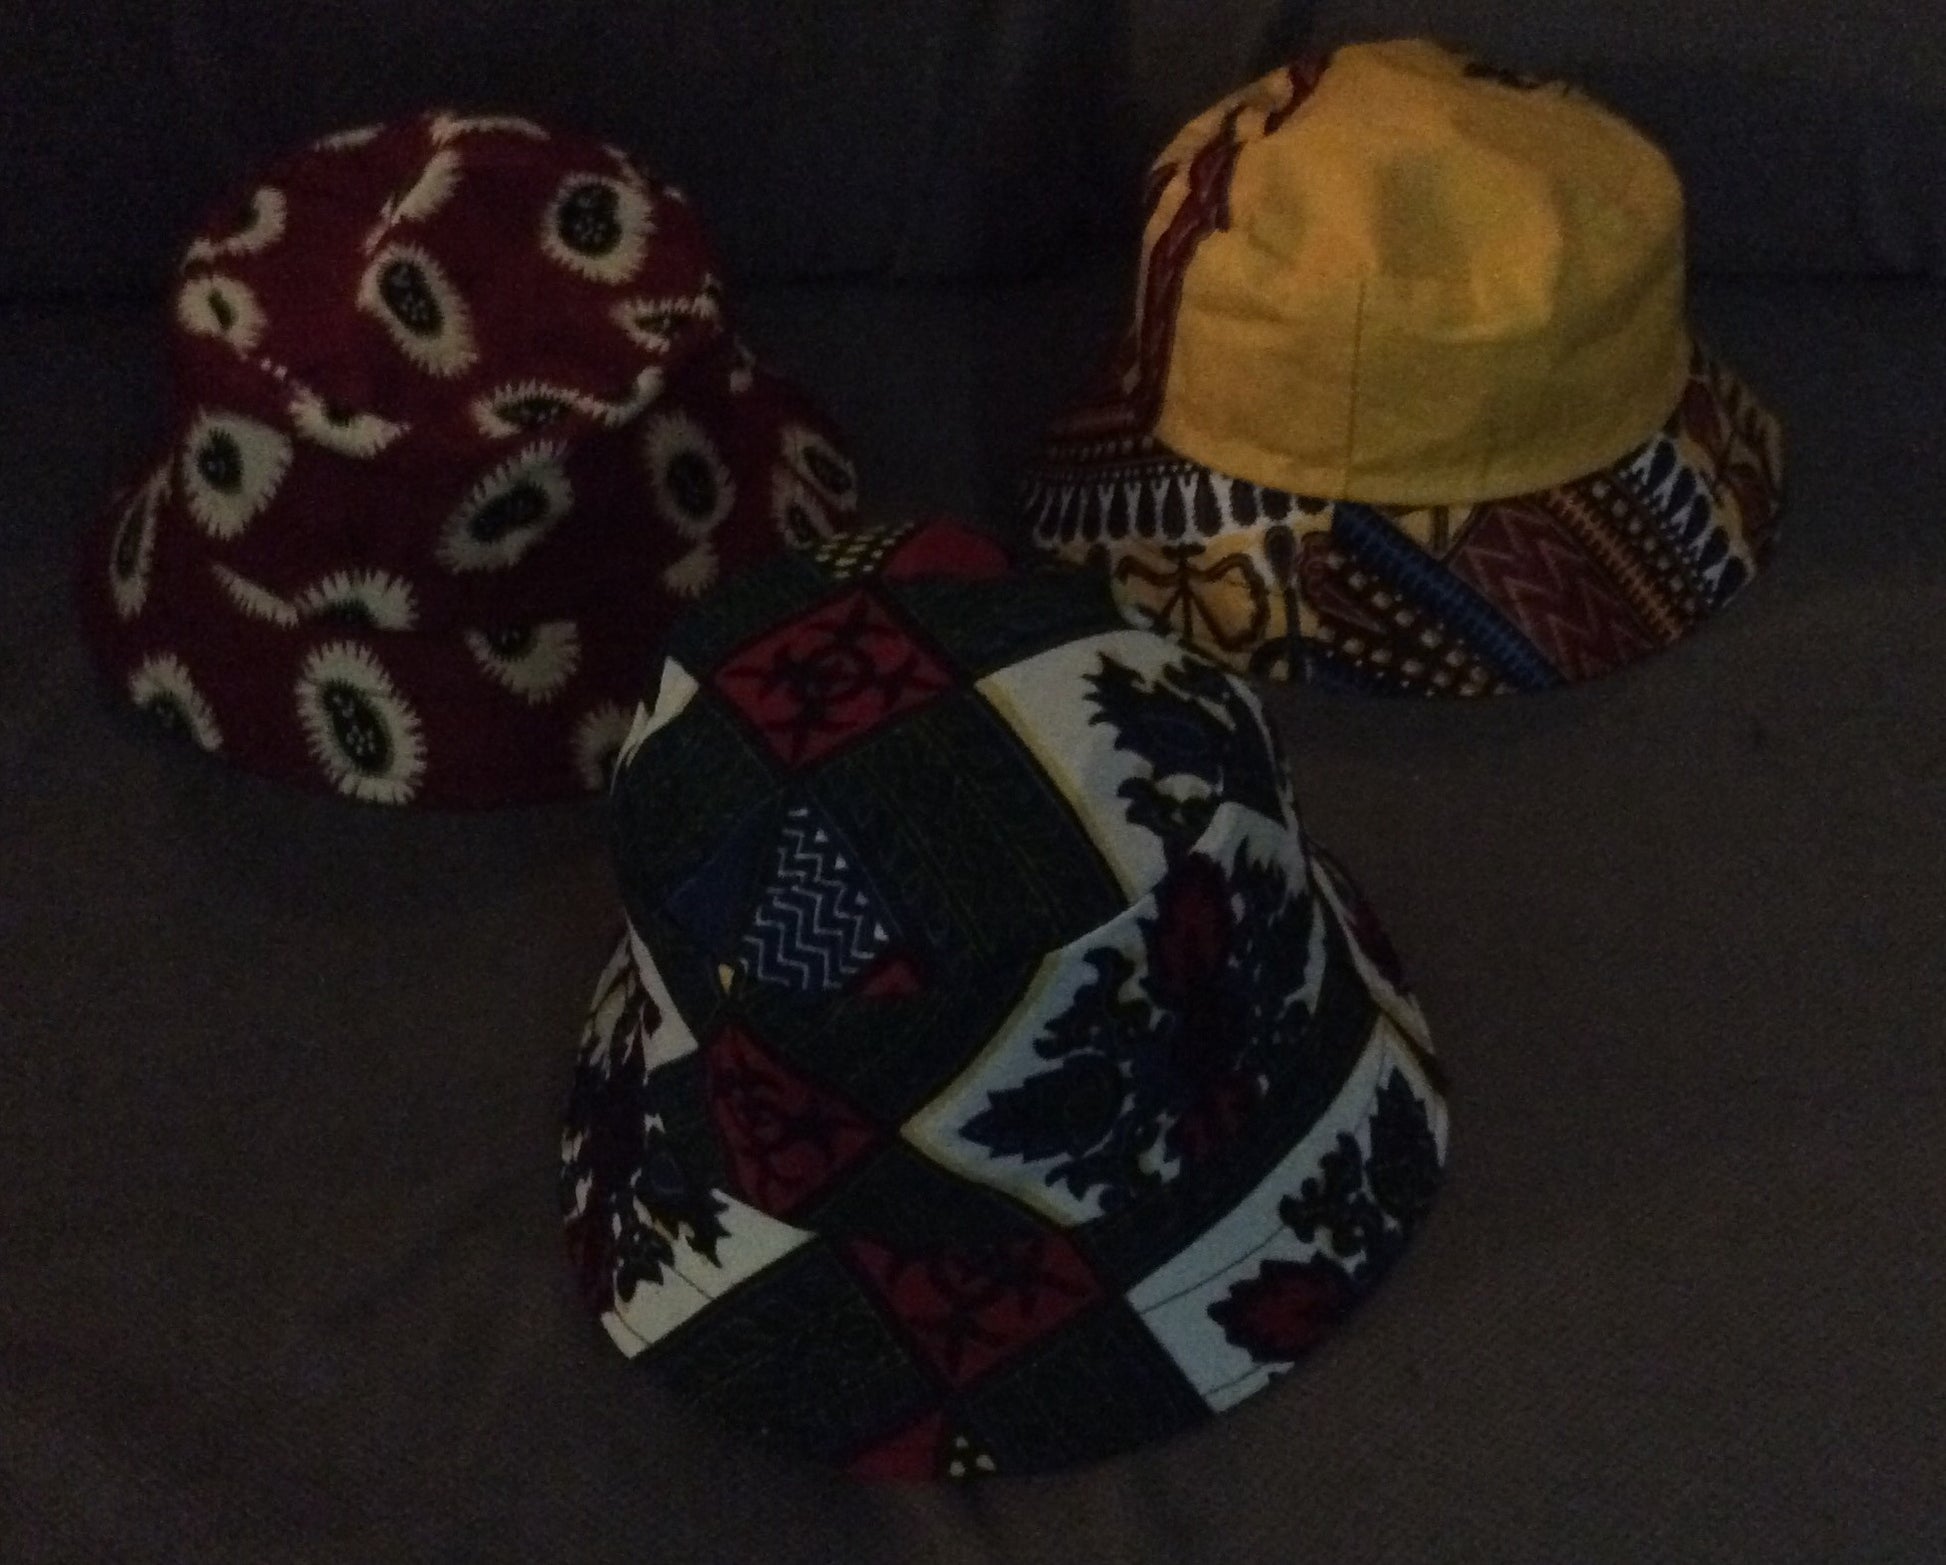 Children's African Wax Print Hat - Natural Couture